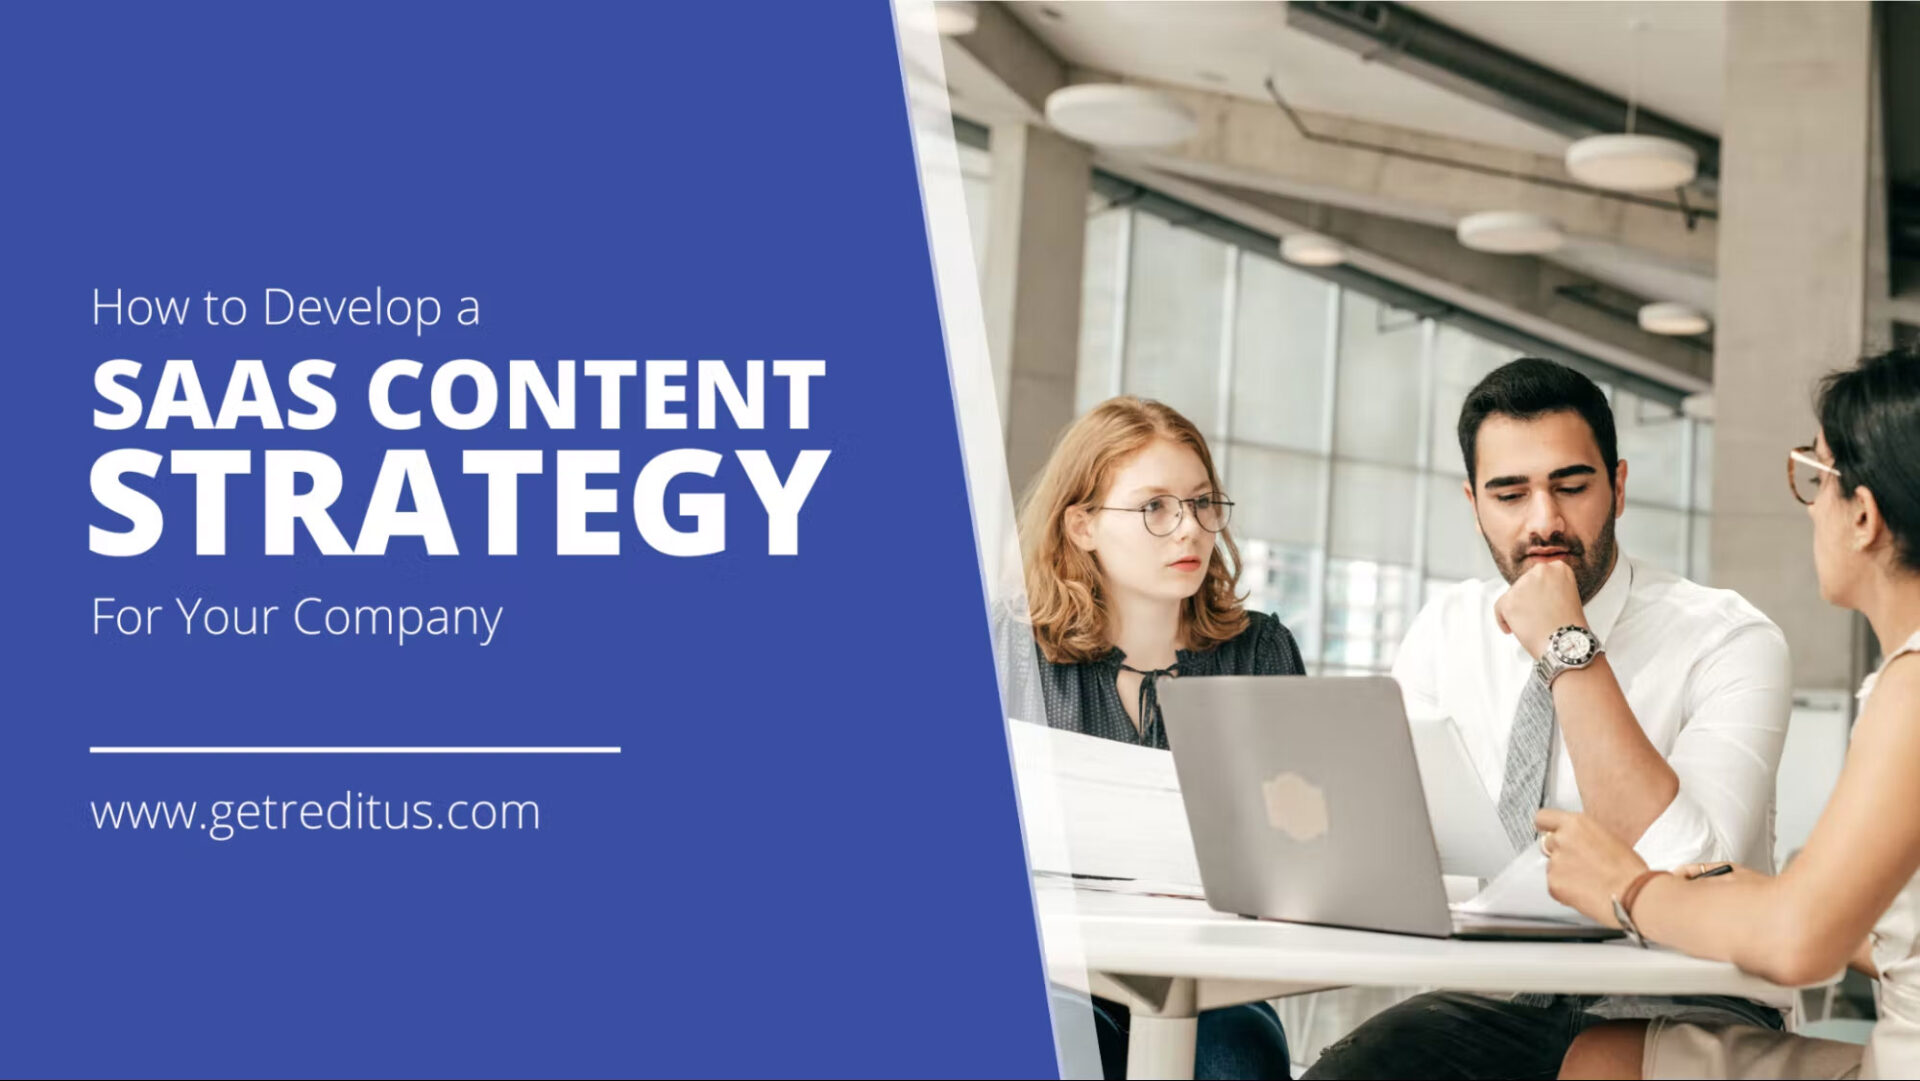 How to Develop an Effective Content Strategy: 5 Tips for SaaS Startups